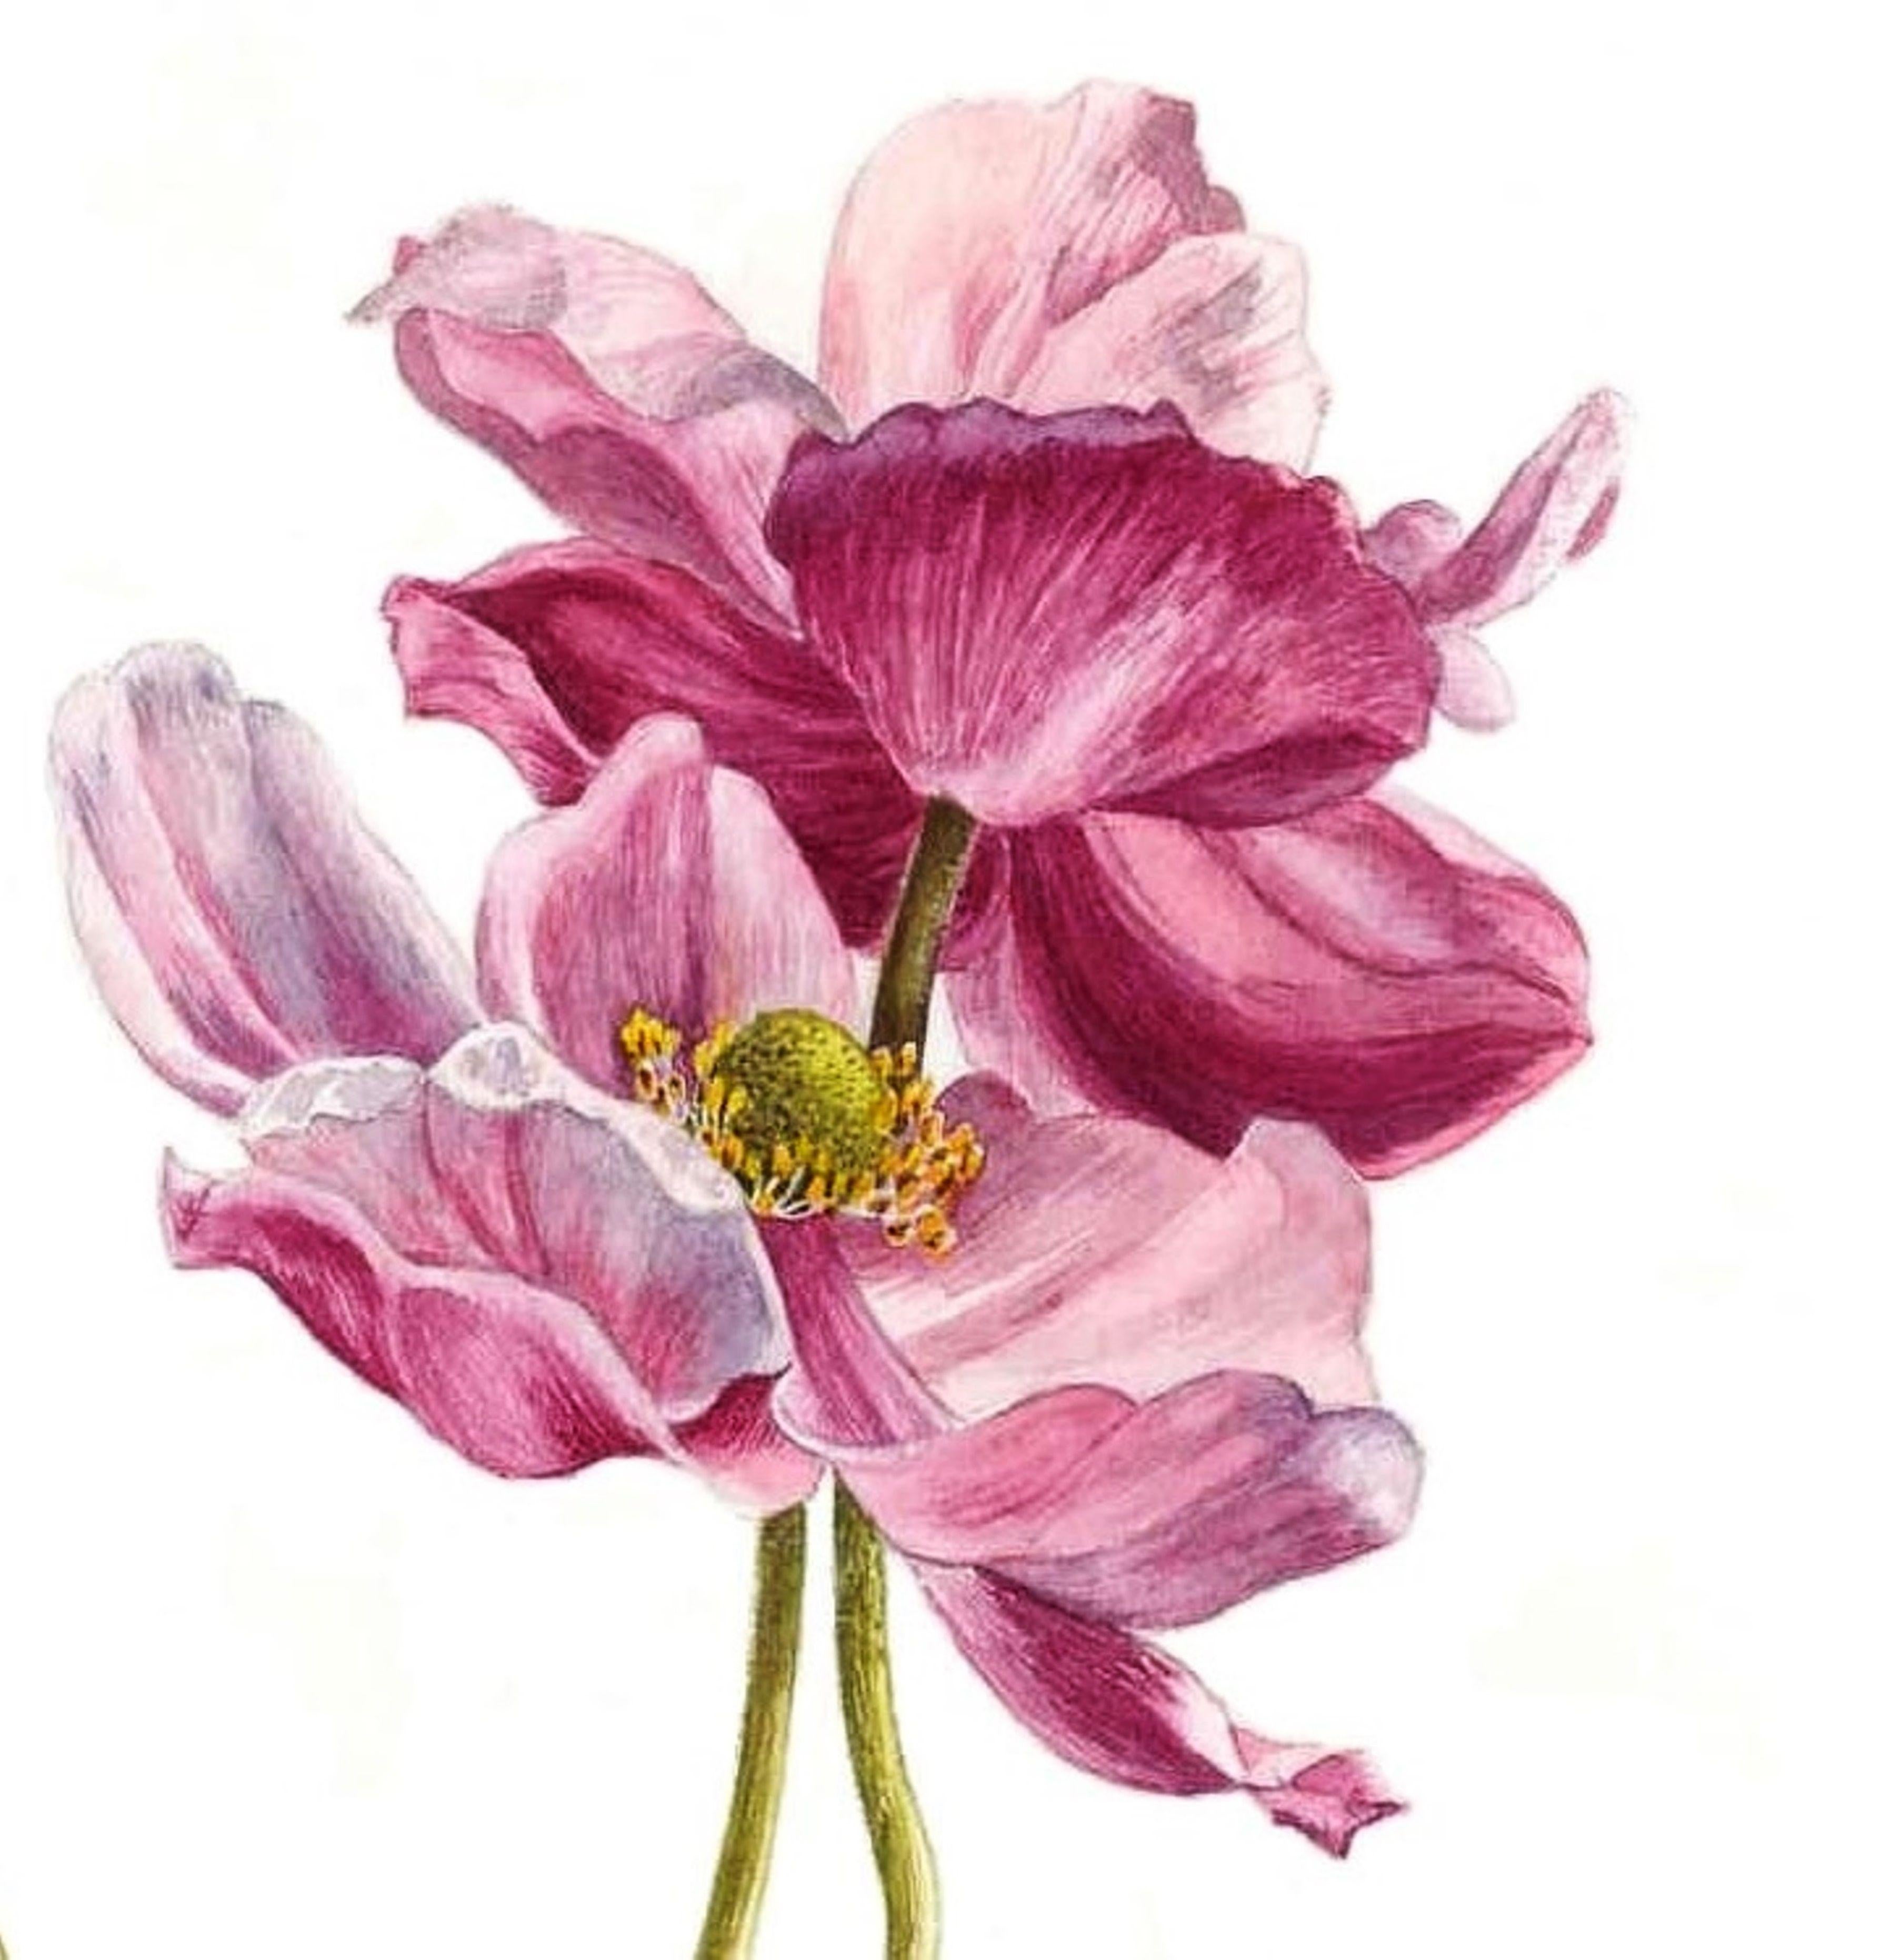 This original botanical painting features Japanese Anemones commonly known as 'Wind Flowers'. I loved painting these delicate pink flowers and especially enjoyed depicting the leaves. I used live flowers from my own garden to paint this botanical